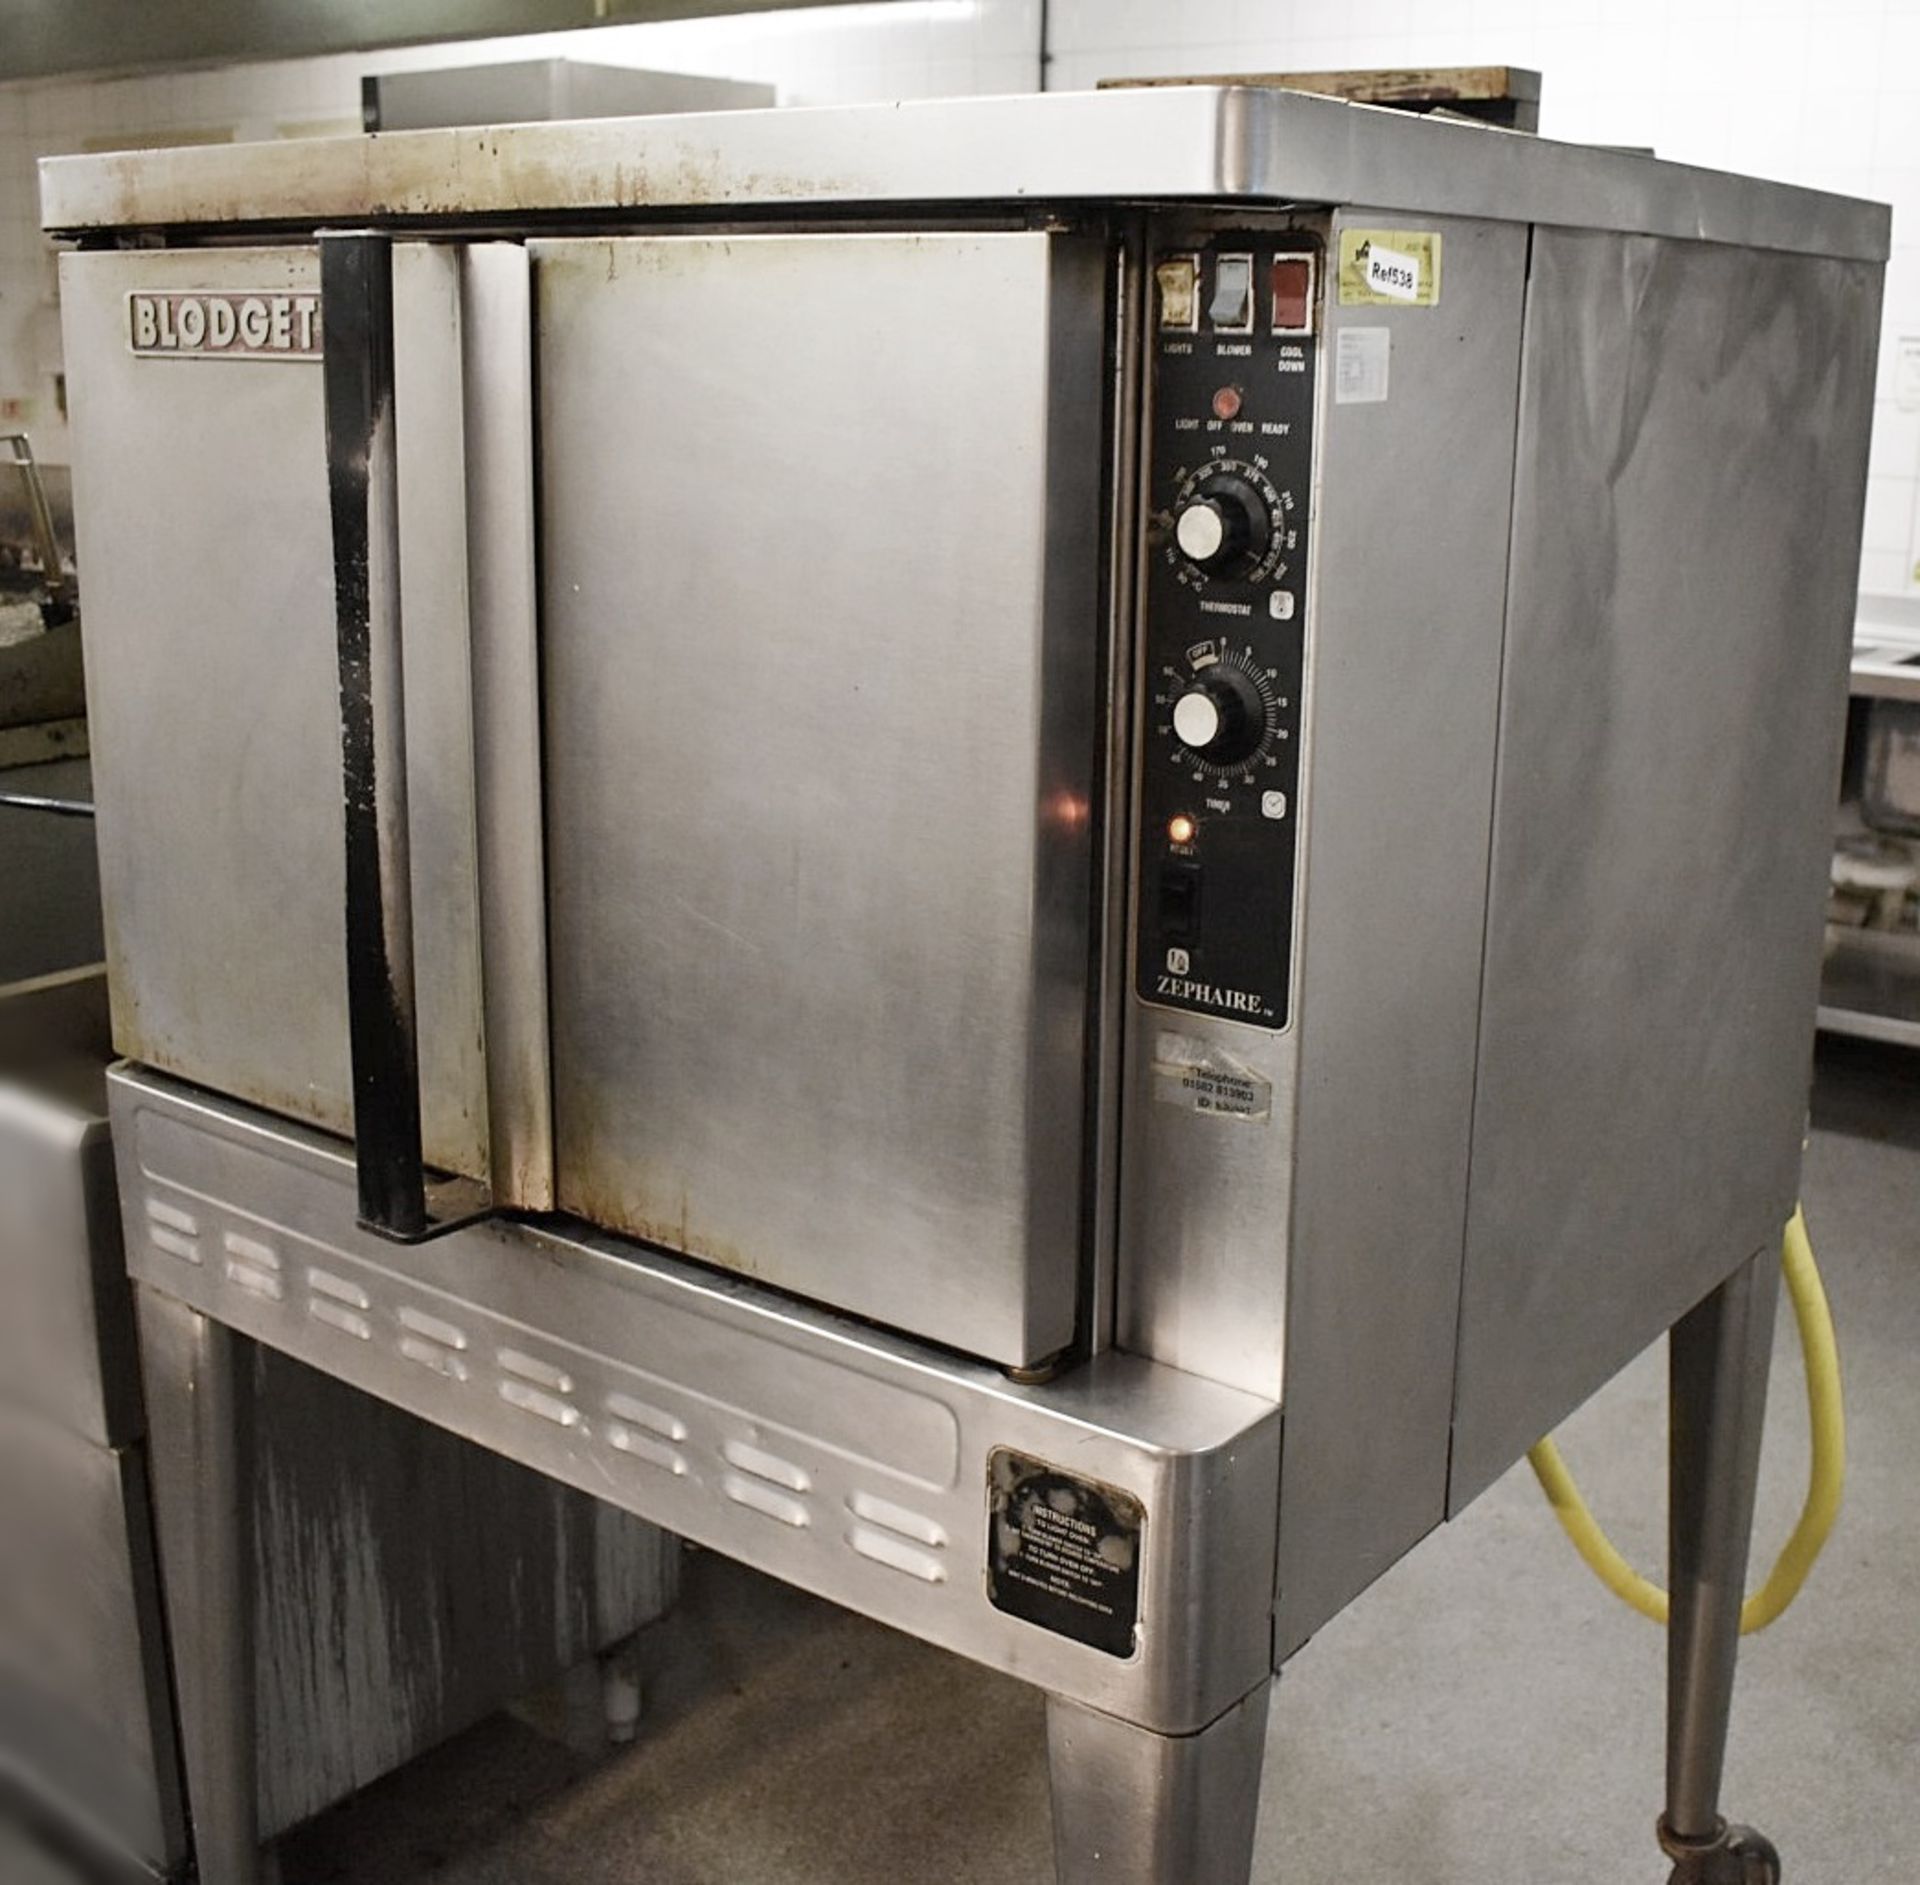 1 x Blodgett Zephaire Natural Gas Convection Oven on Castors - Stainless Steel Finish - CL461 - - Image 2 of 6